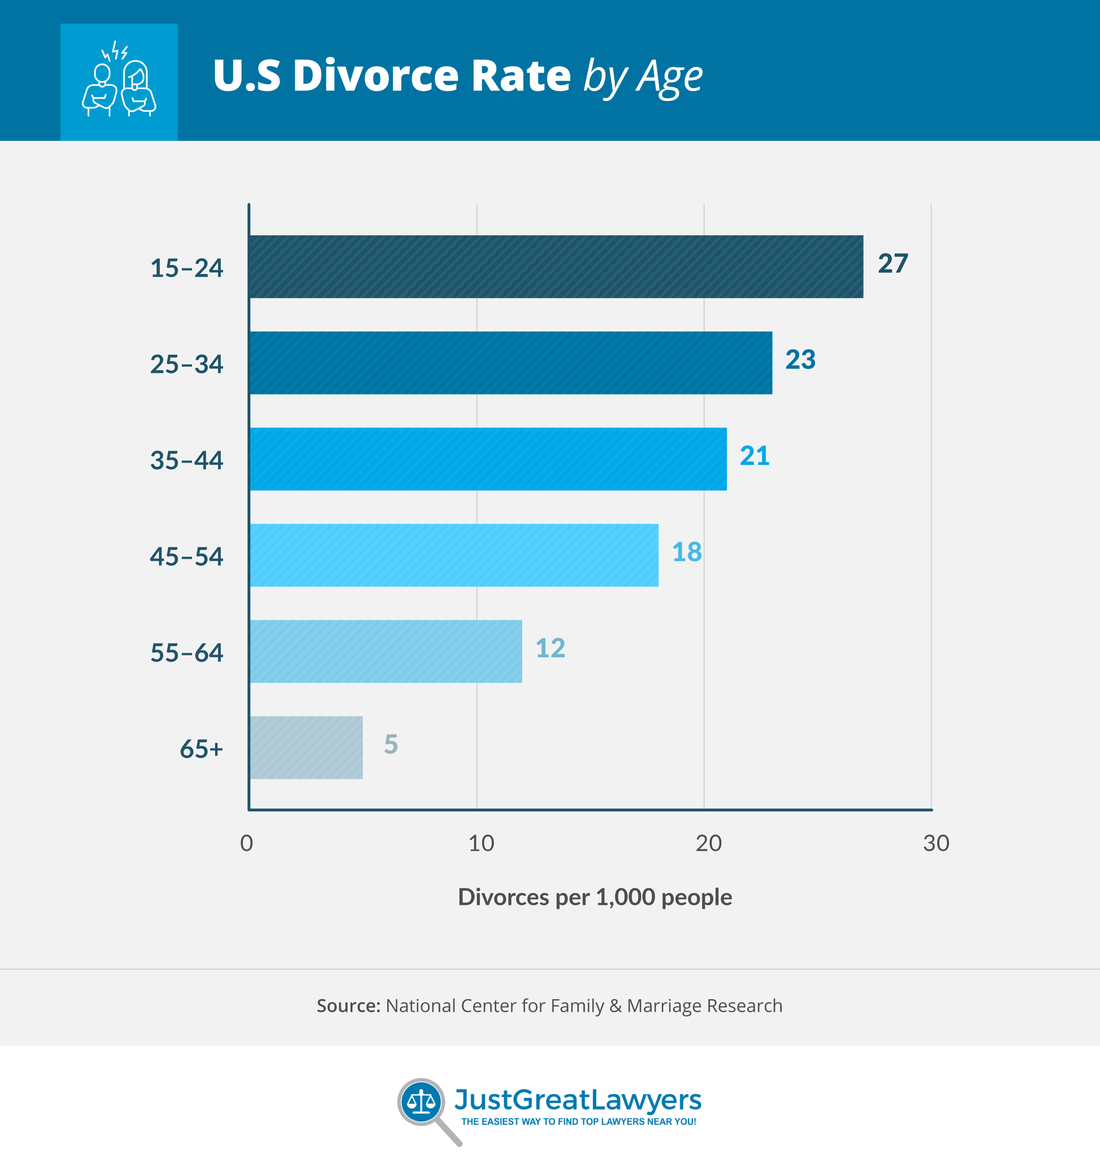 couples in arranged marriages lower divorce rate